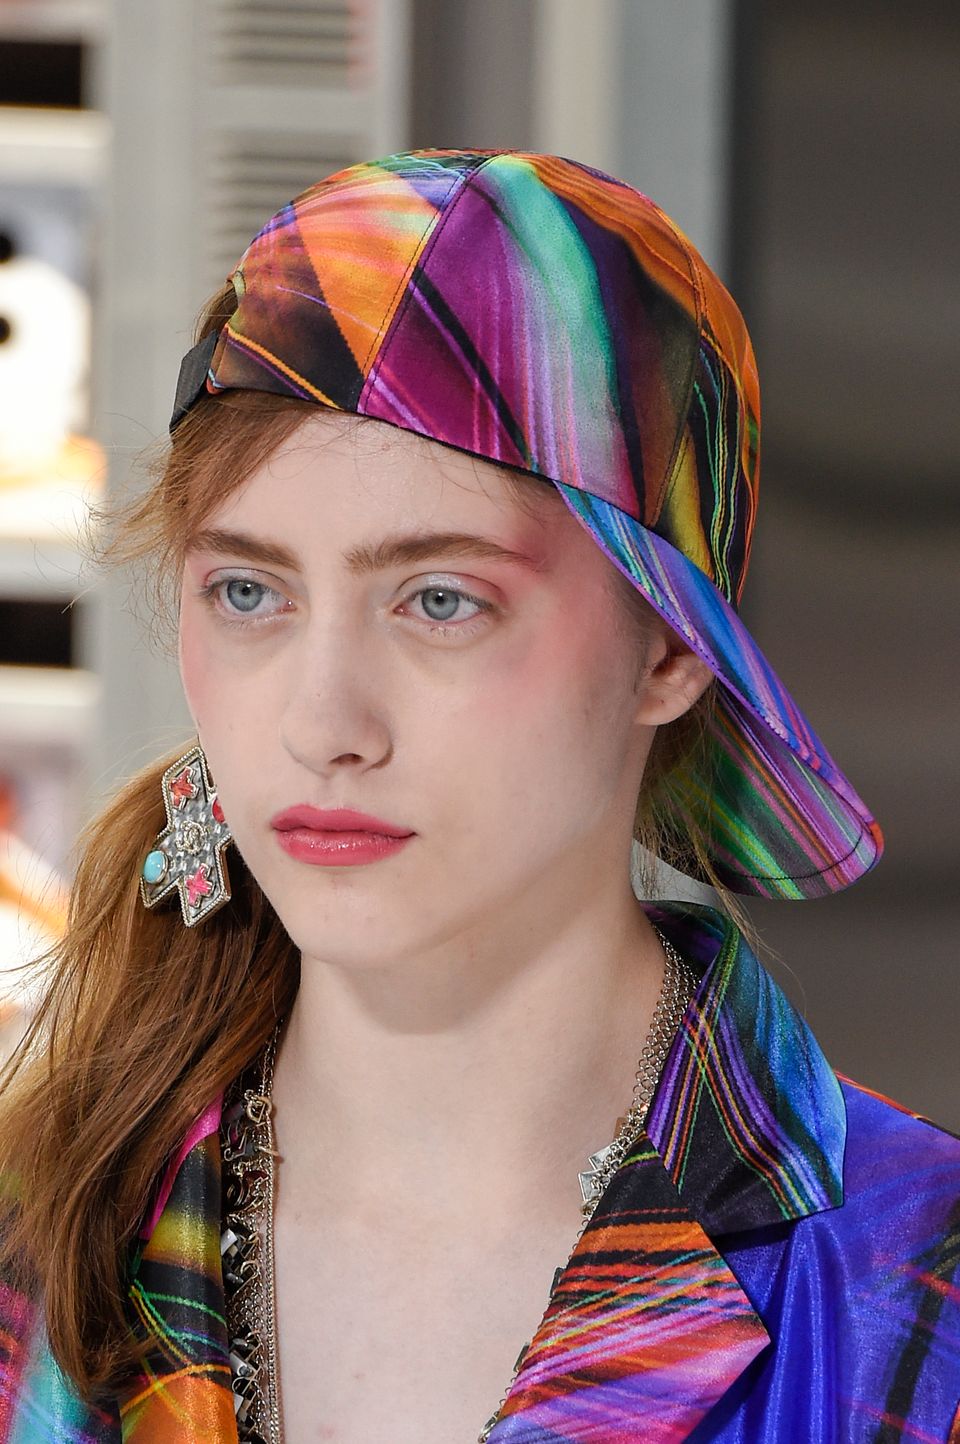 Chanel Bring Backwards Caps Into The Office For Spring/Summer 2017 ...